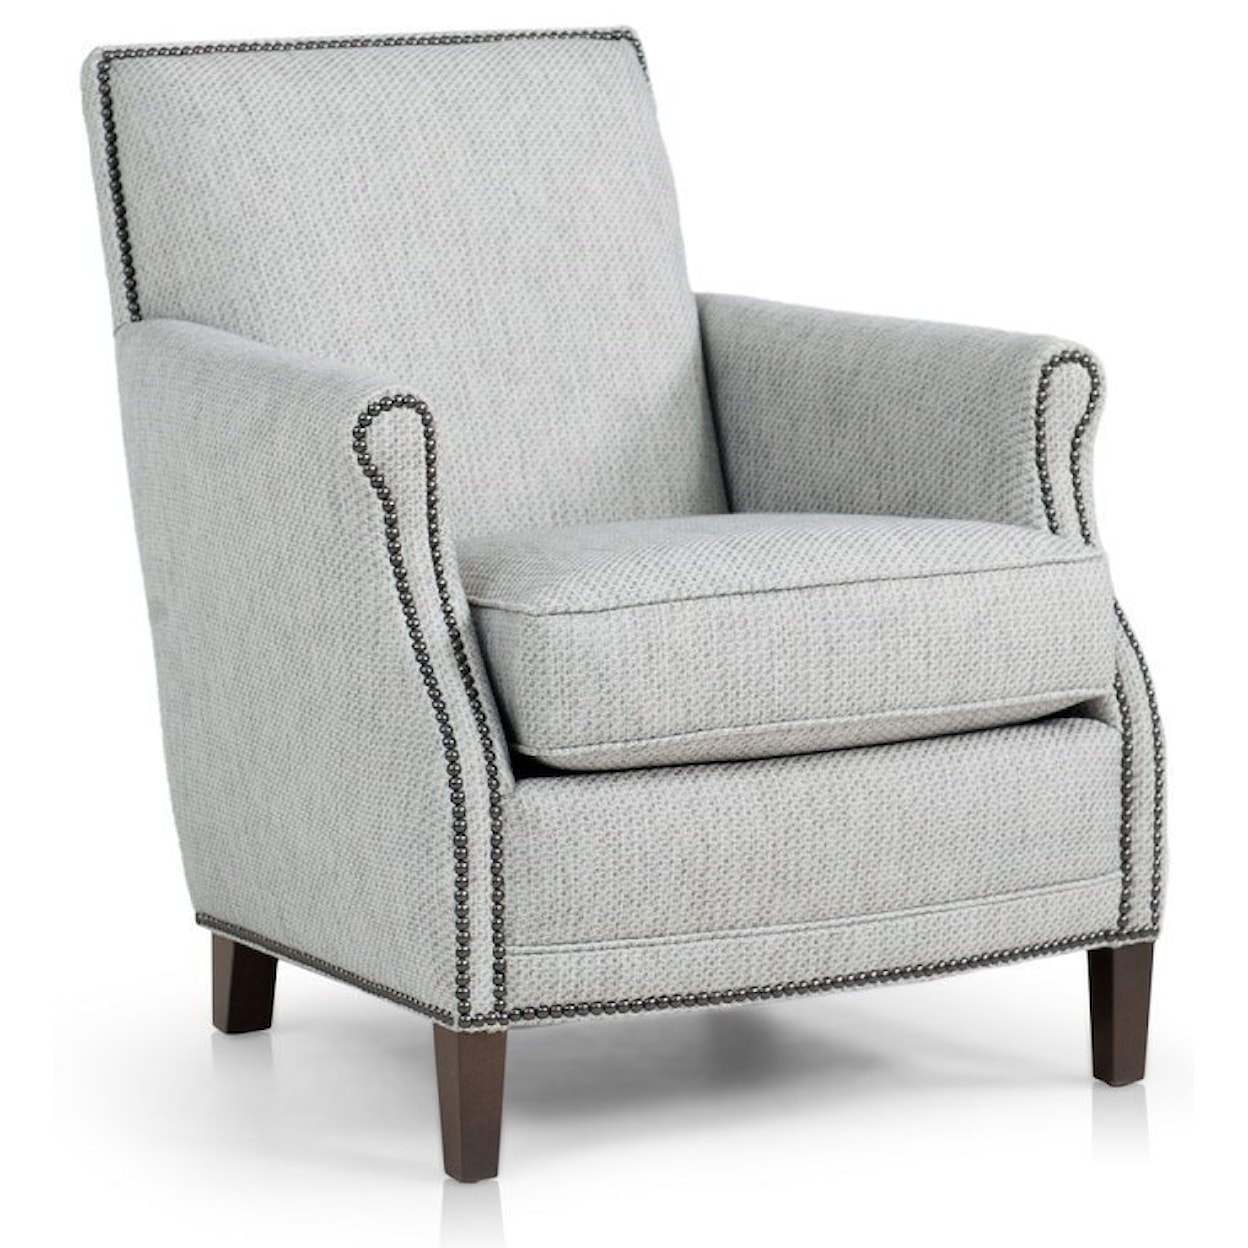 Smith Brothers 517 Chair